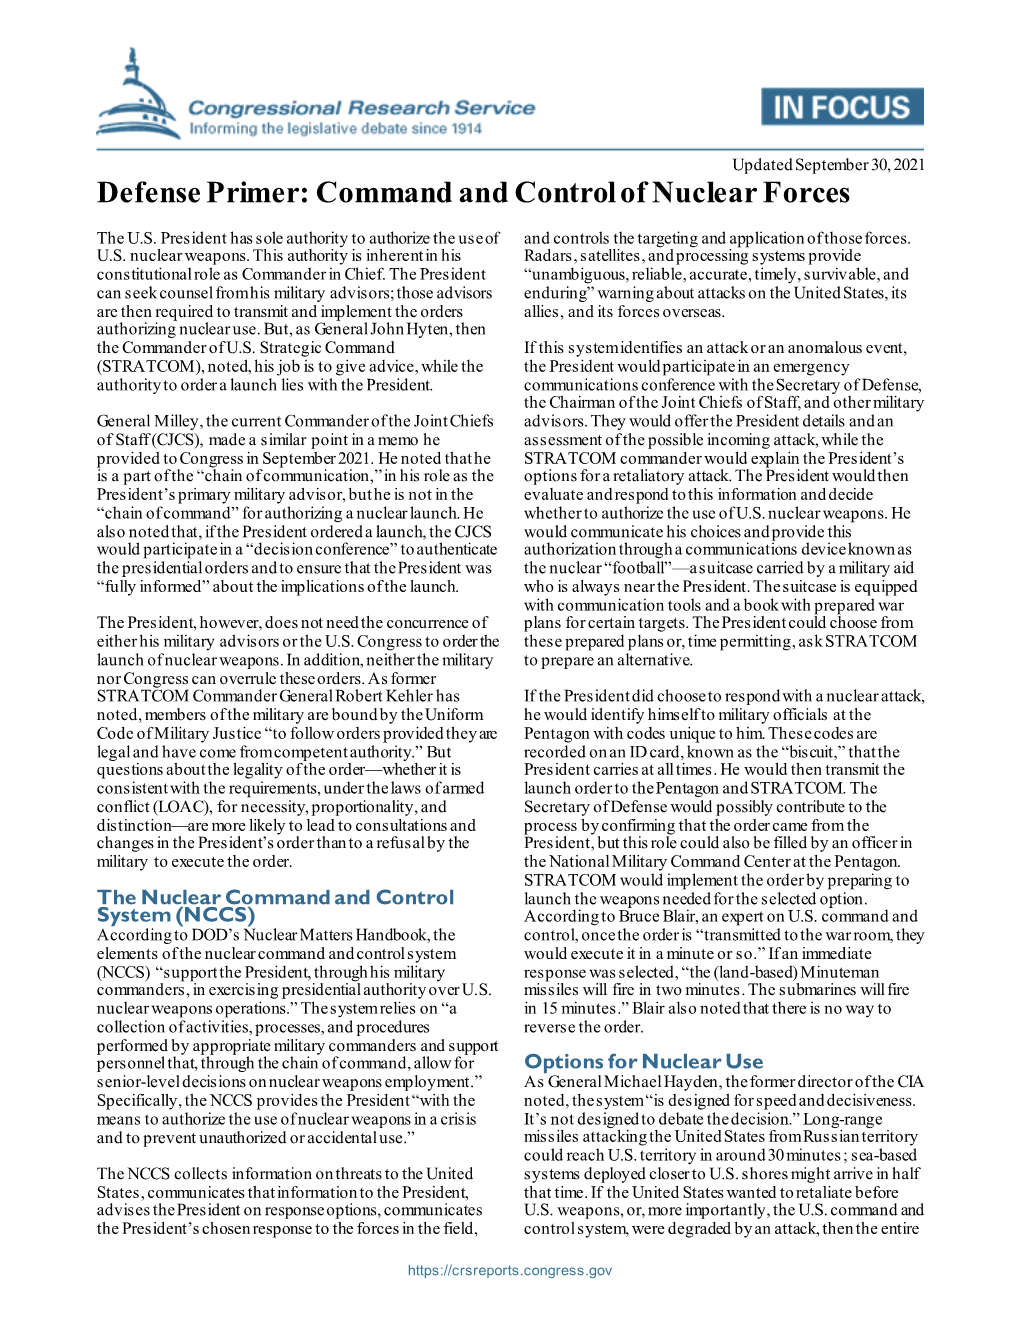 Defense Primer: Command and Control of Nuclear Forces